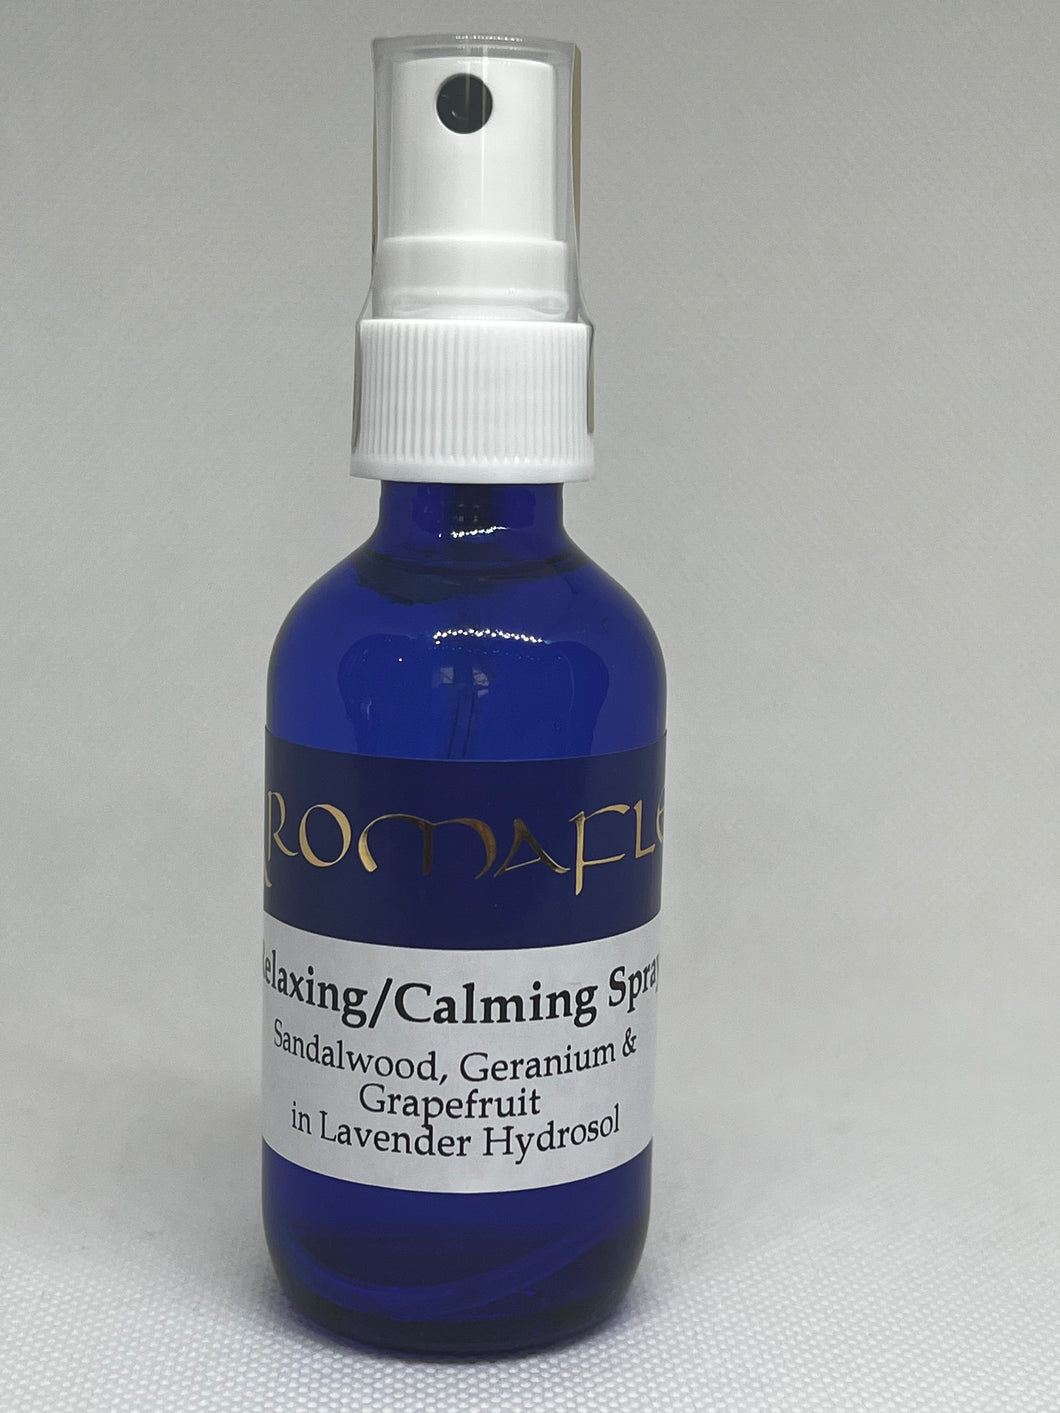 Relaxing and Calming Spray